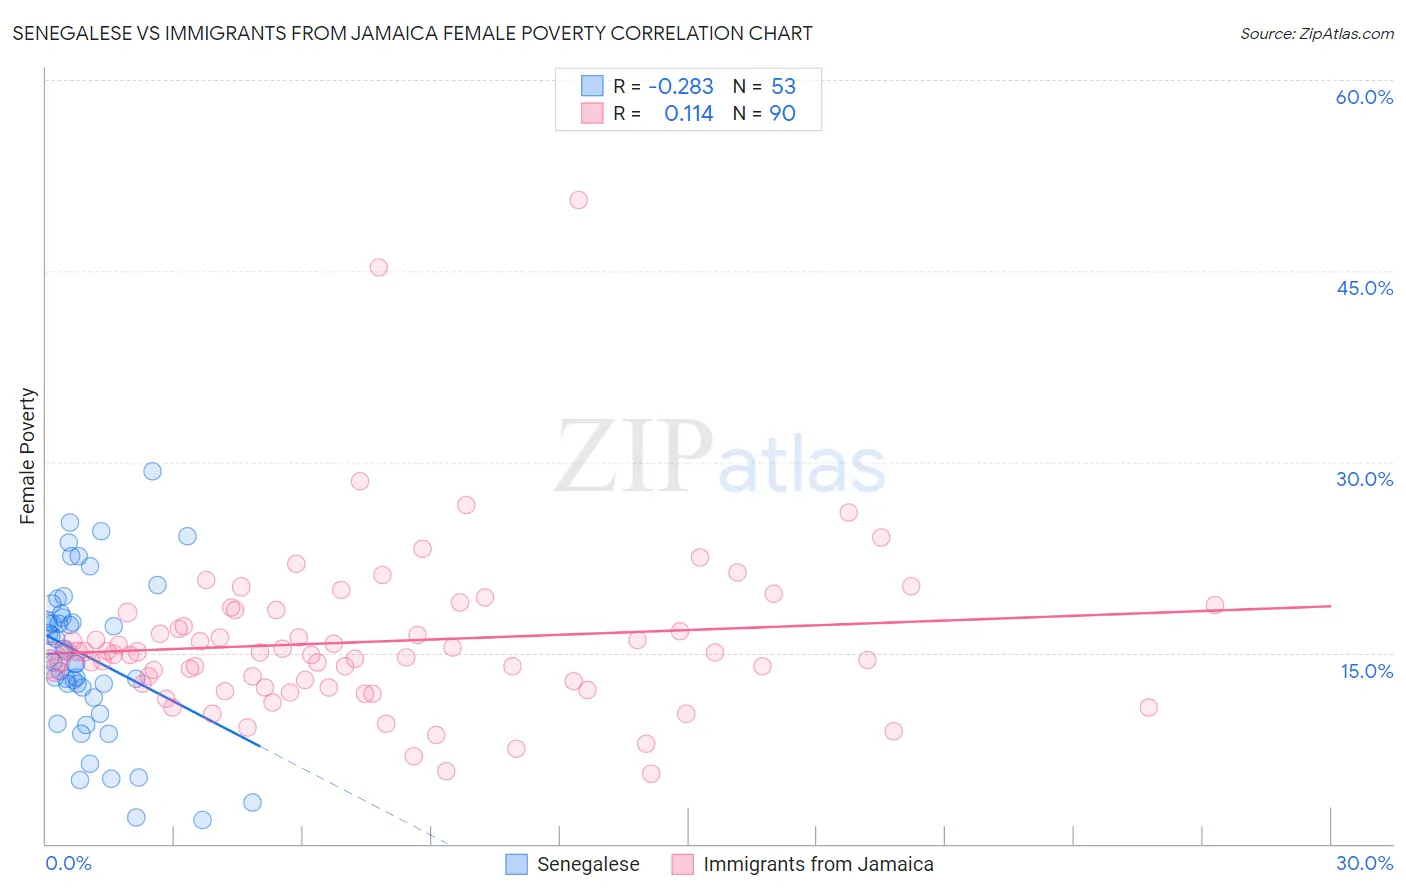 Senegalese vs Immigrants from Jamaica Female Poverty